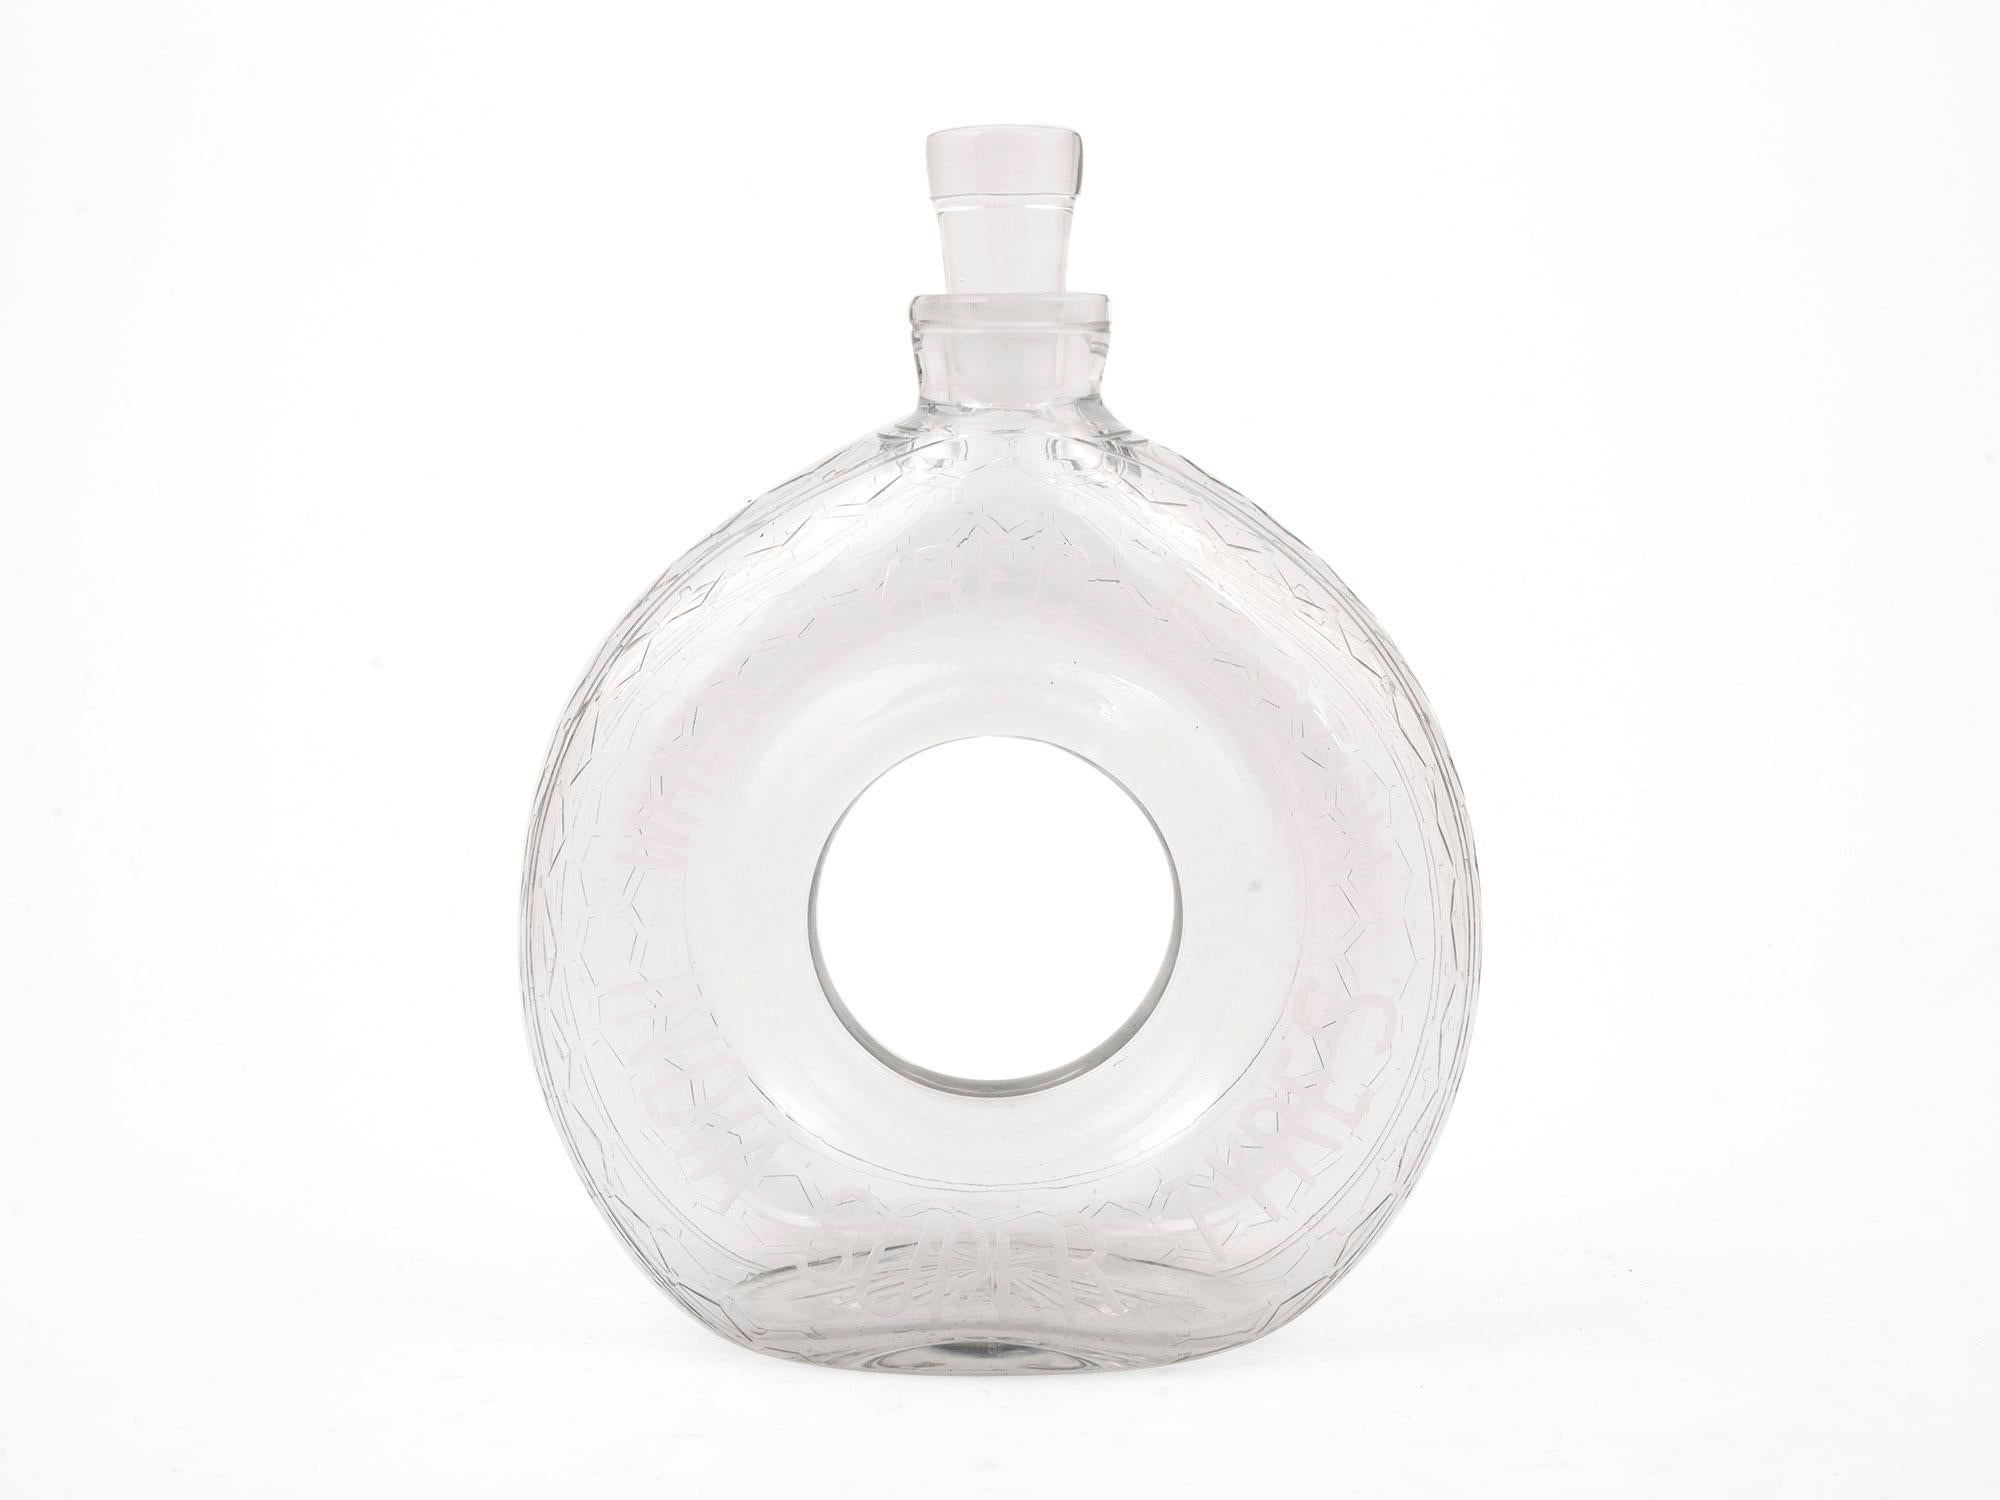 Dating to the Art Deco Period

From our Decanter collection, we are pleased to offer this Rare Novelty Glass Tyre Decanter. The decanter of oval shape with a central hole formed in glass with a glass stopper. The decanter modelled as a tyre used as